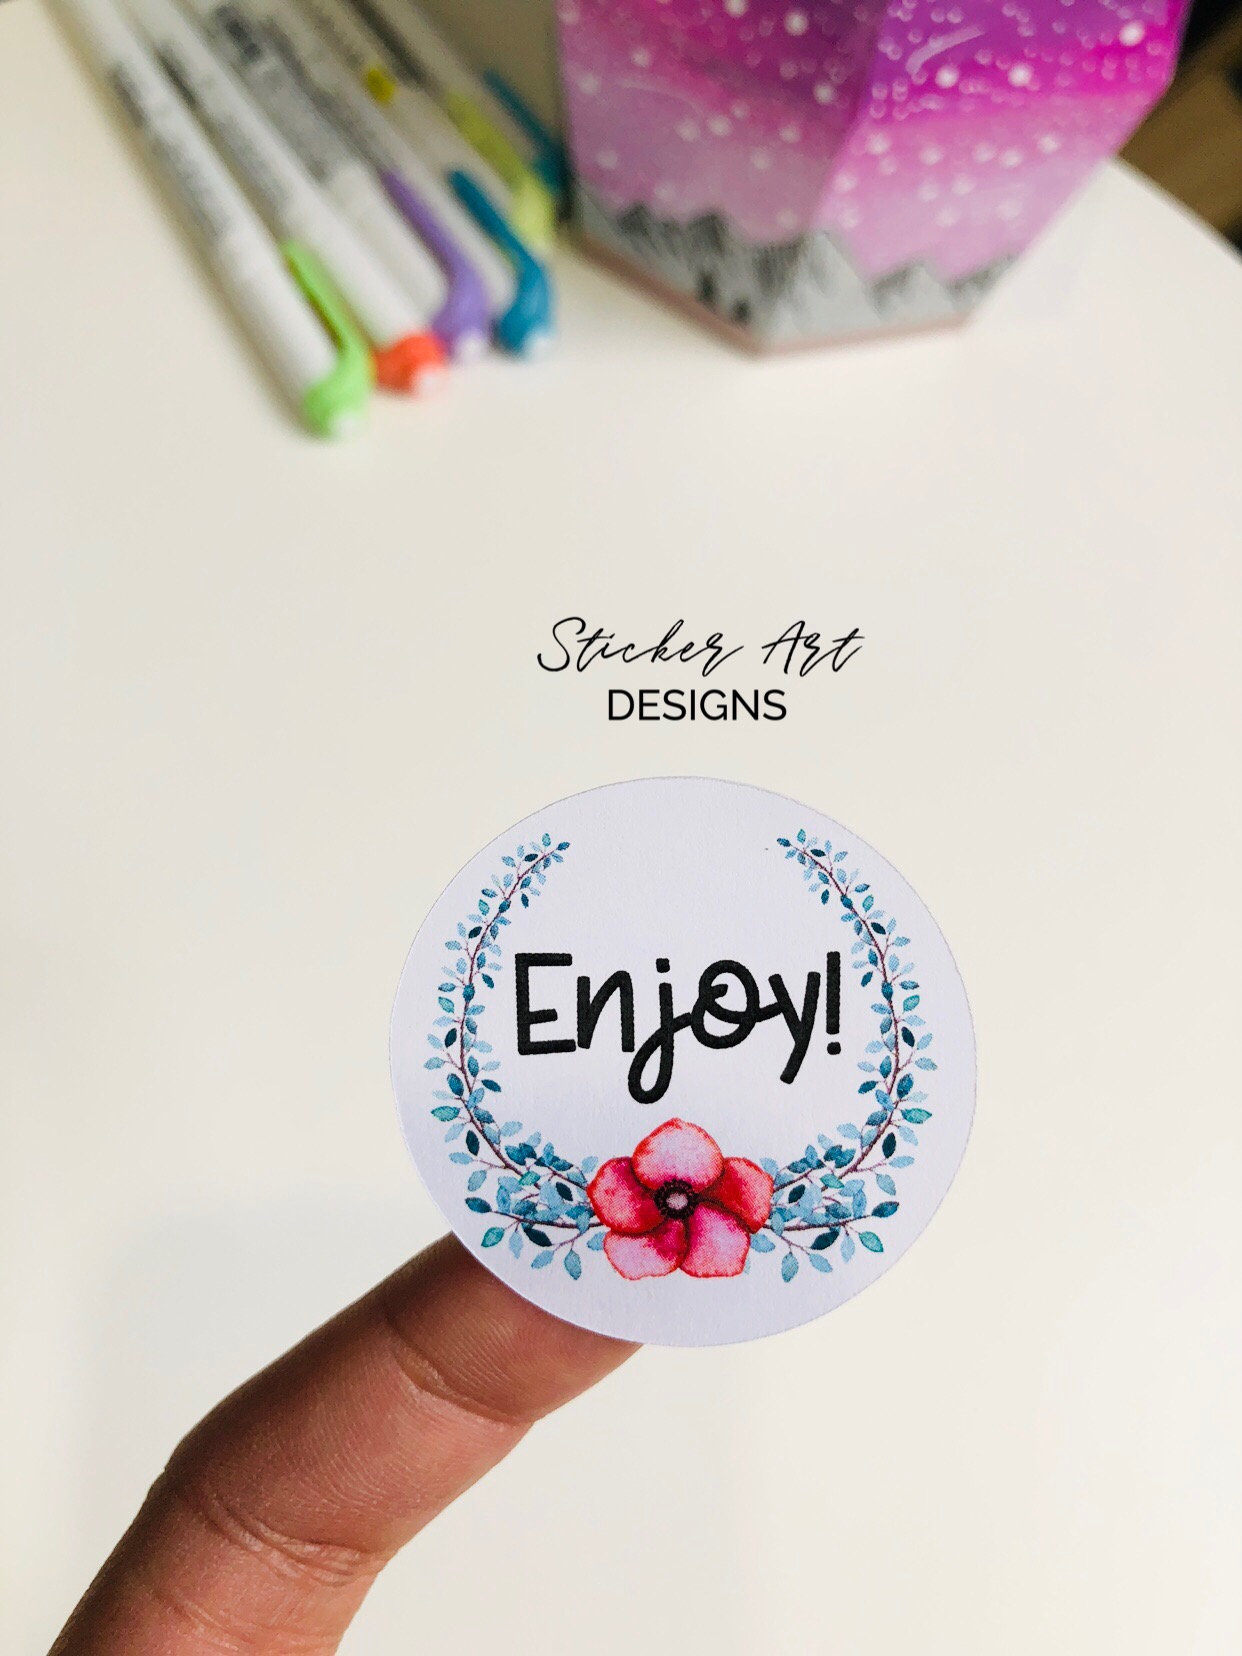 16 Enjoy! Stickers, Happy Mail Stickers, Small Business Stickers, Busi –  Sticker Art Designs